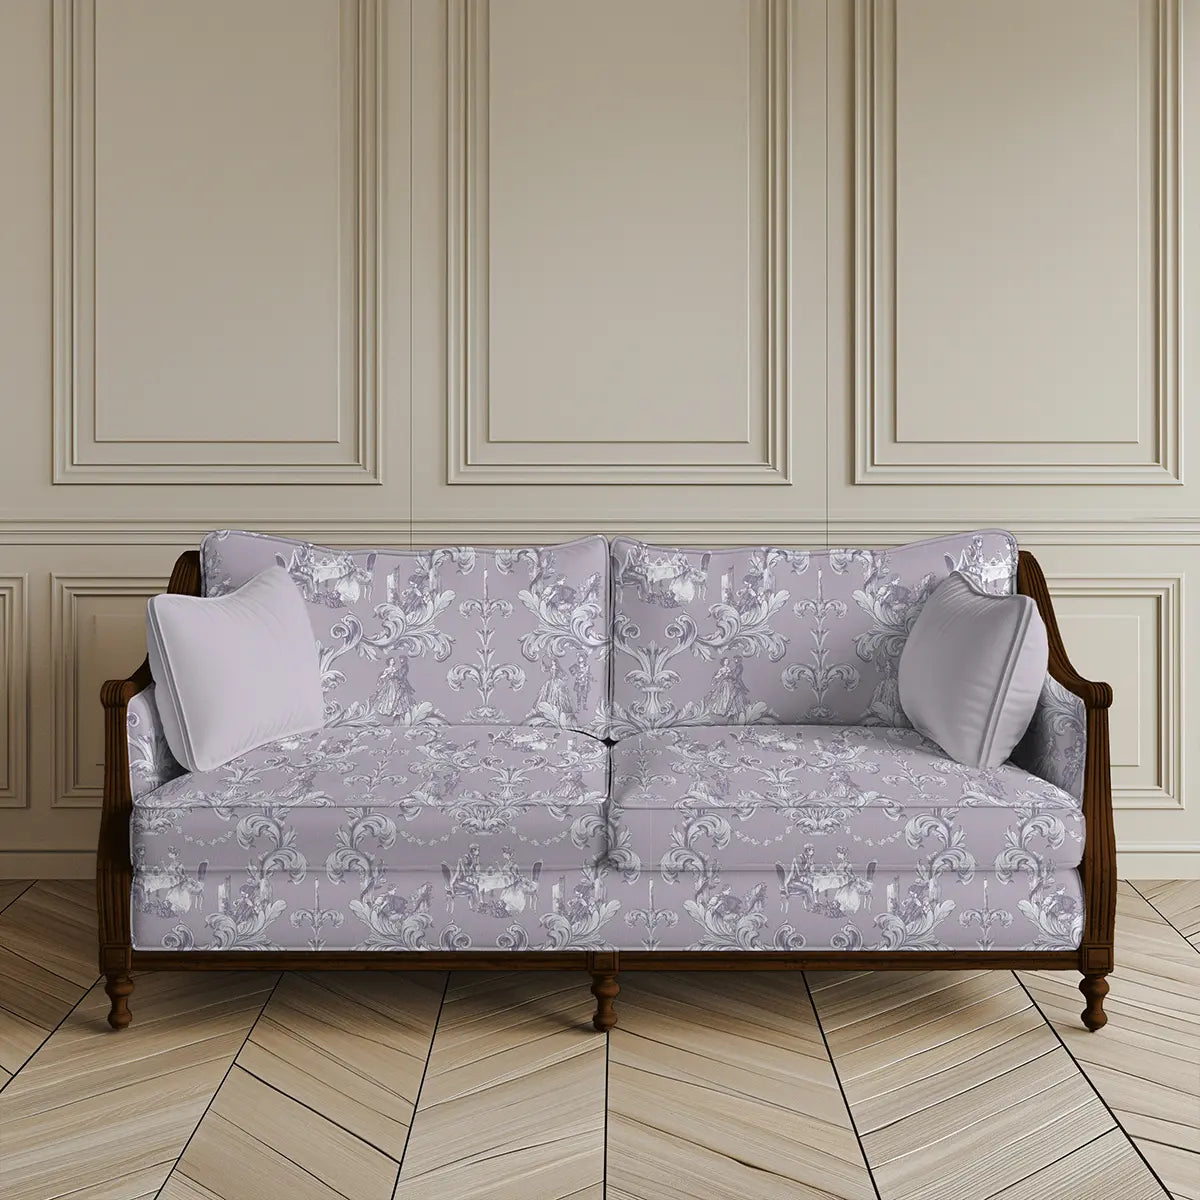 Buy Date Night, Sofa and Chairs Upholstery Fabric Lilac Color